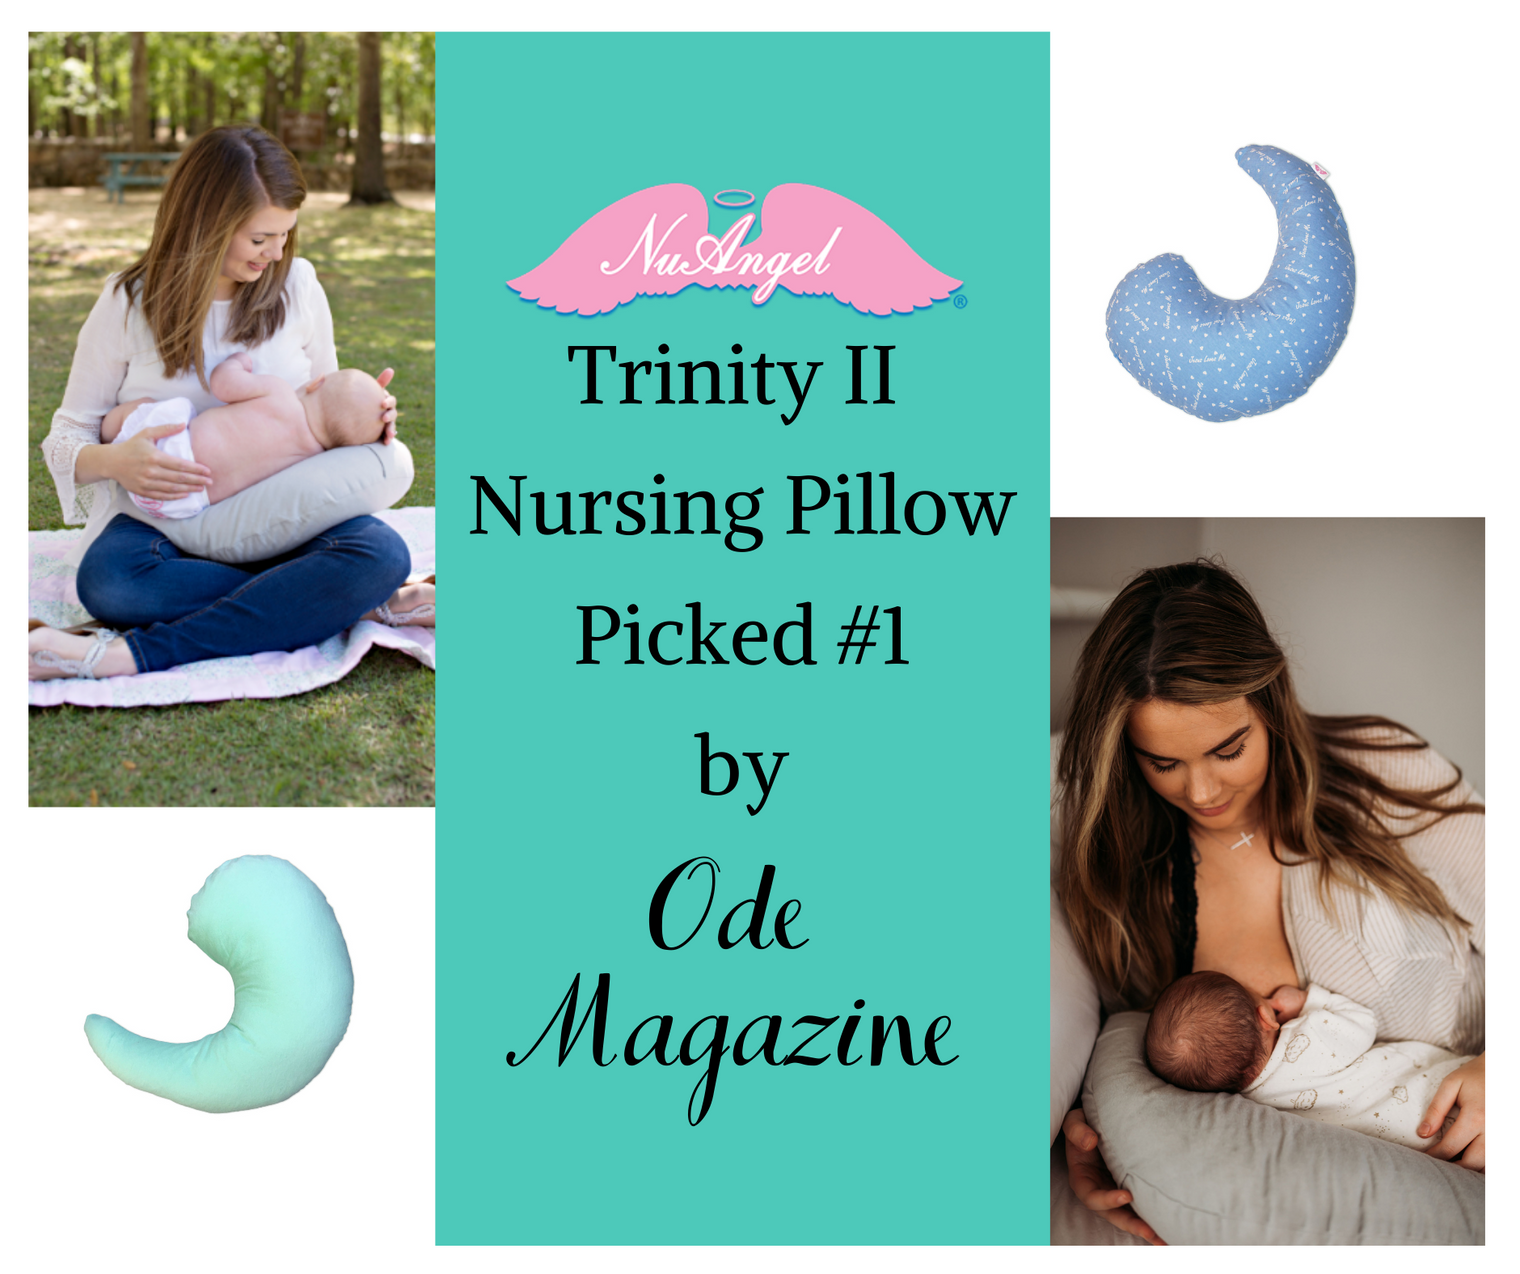 NuAngel's Nursing Pillow is the #1 Pick for Nursing Pillows by Ode Magazine!